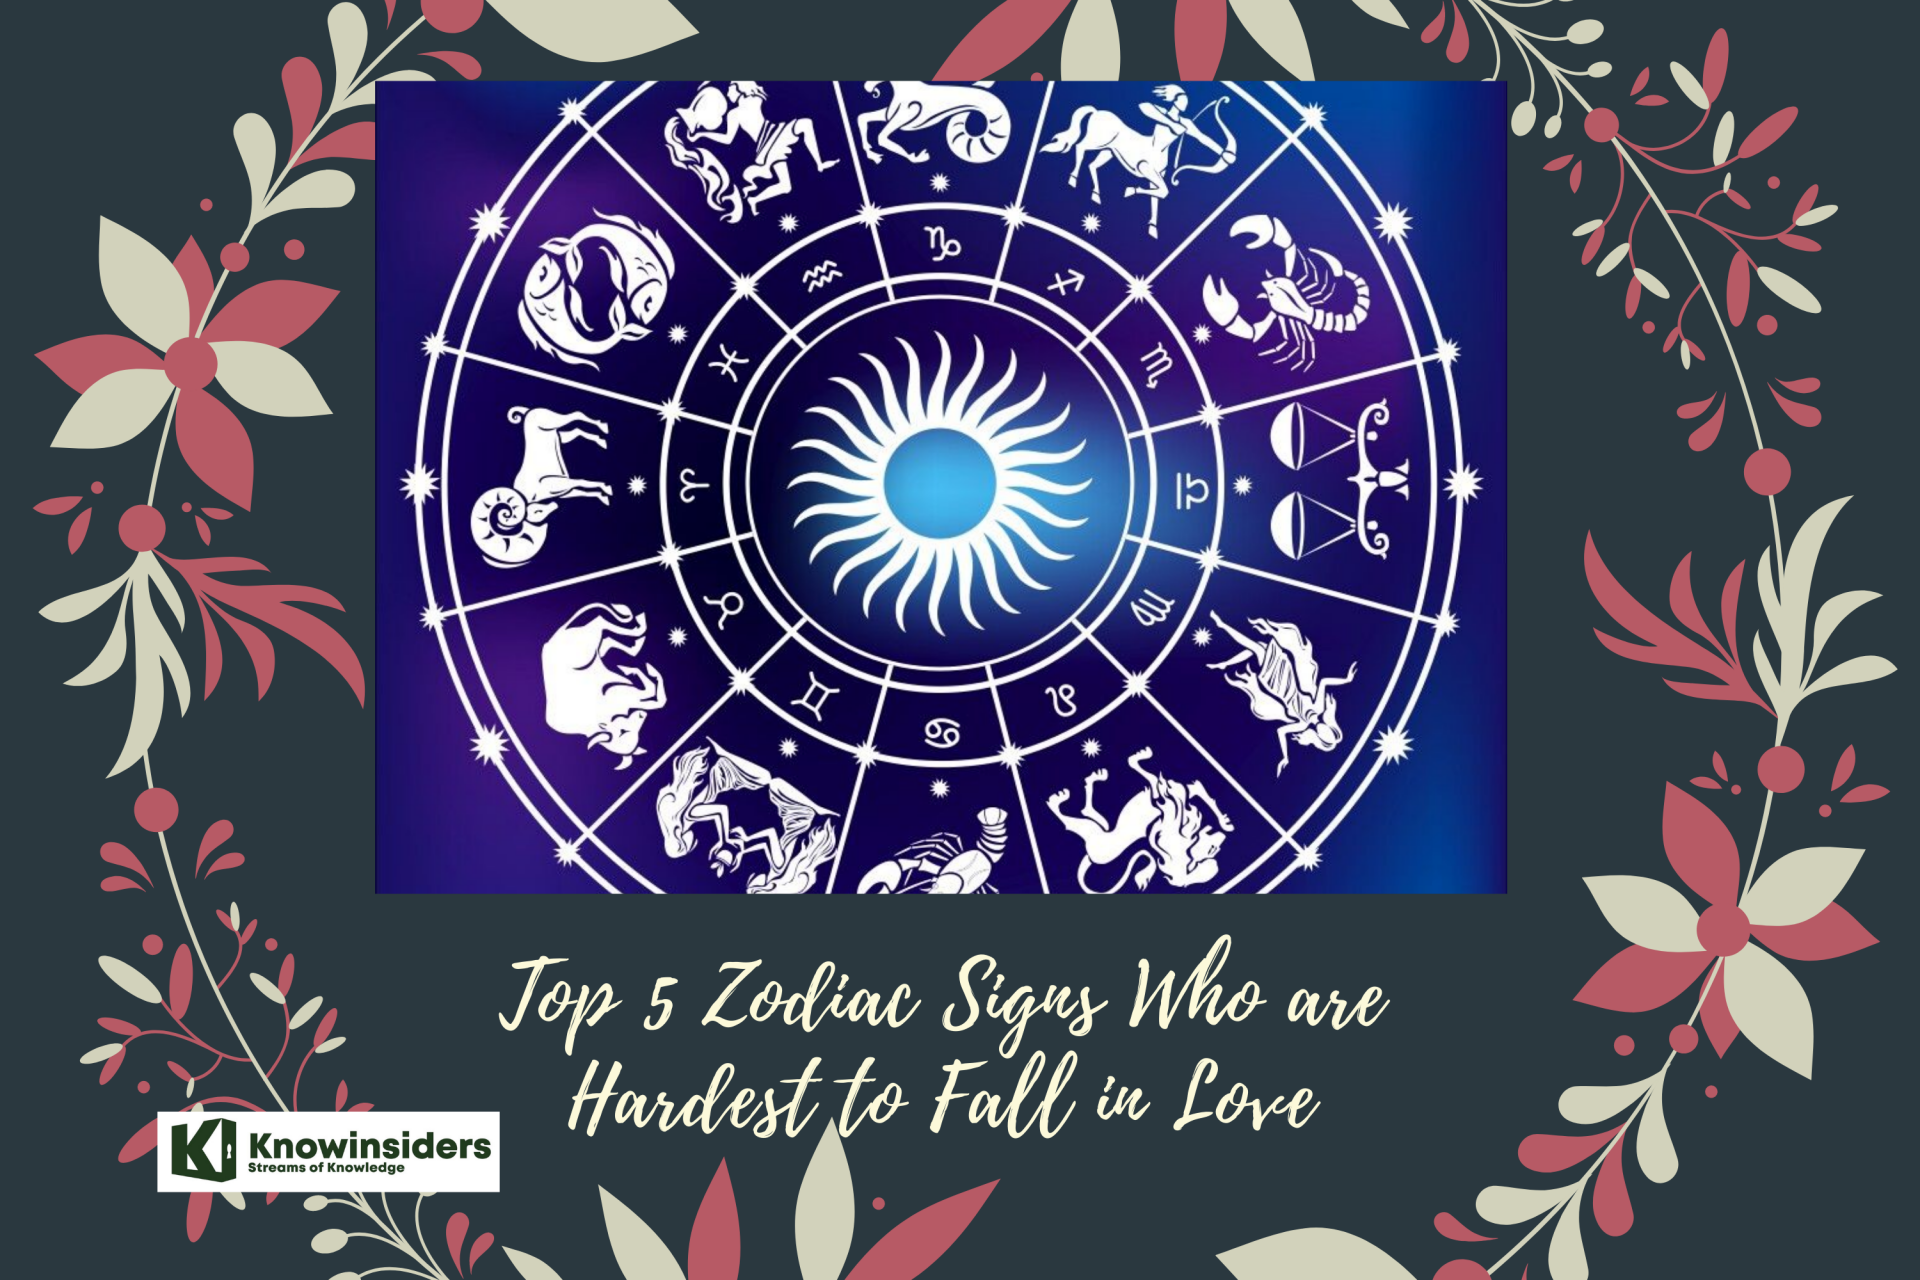 Top 5 Zodiac Signs Who are Hardest to Fall in Love